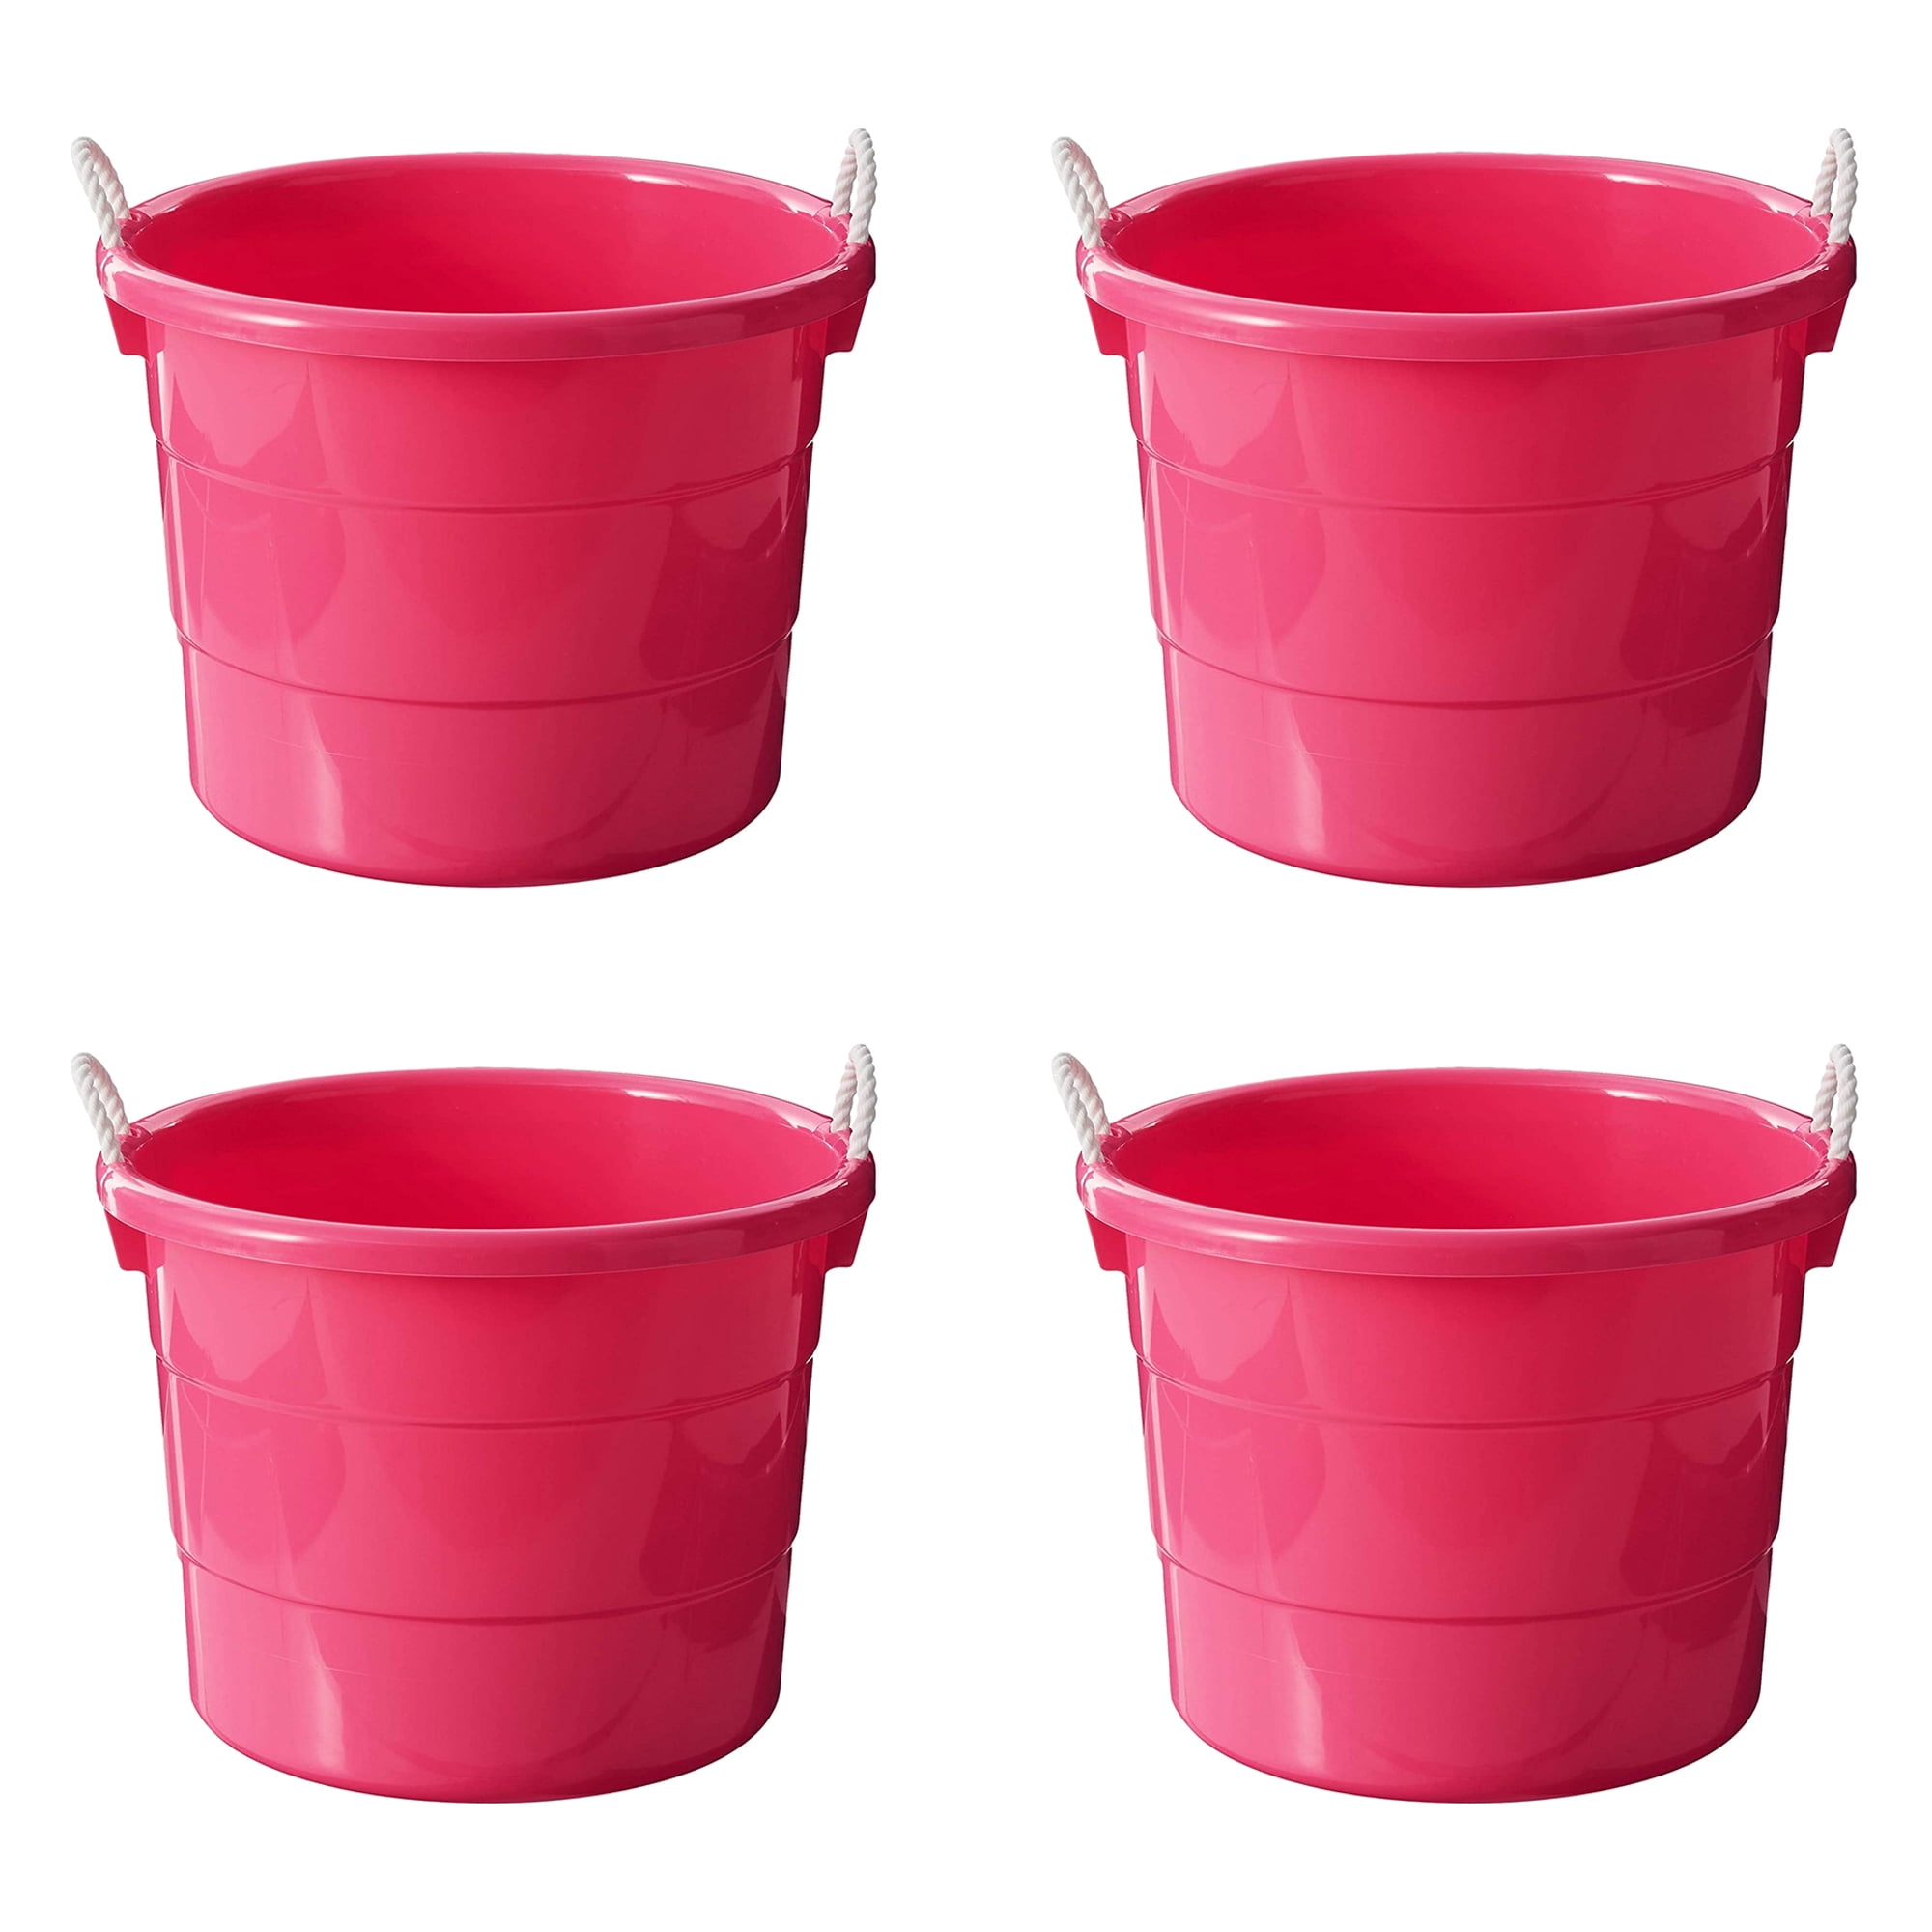 Homz Plastic 18 Gallon Utility Bucket Container with Handles, Pink (2 Pack)